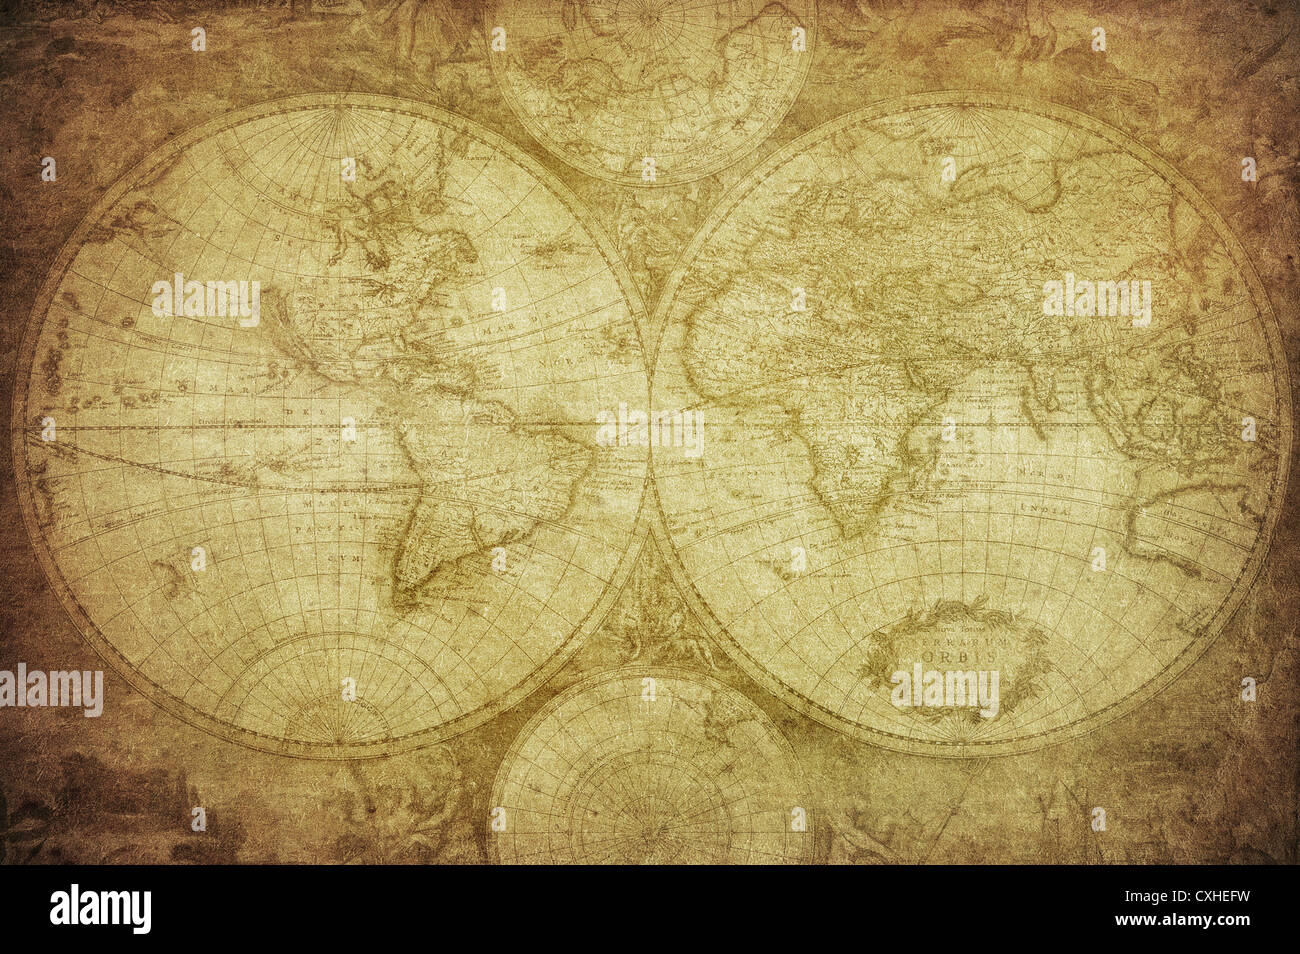 vintage map of the world 1675 Stock Photo